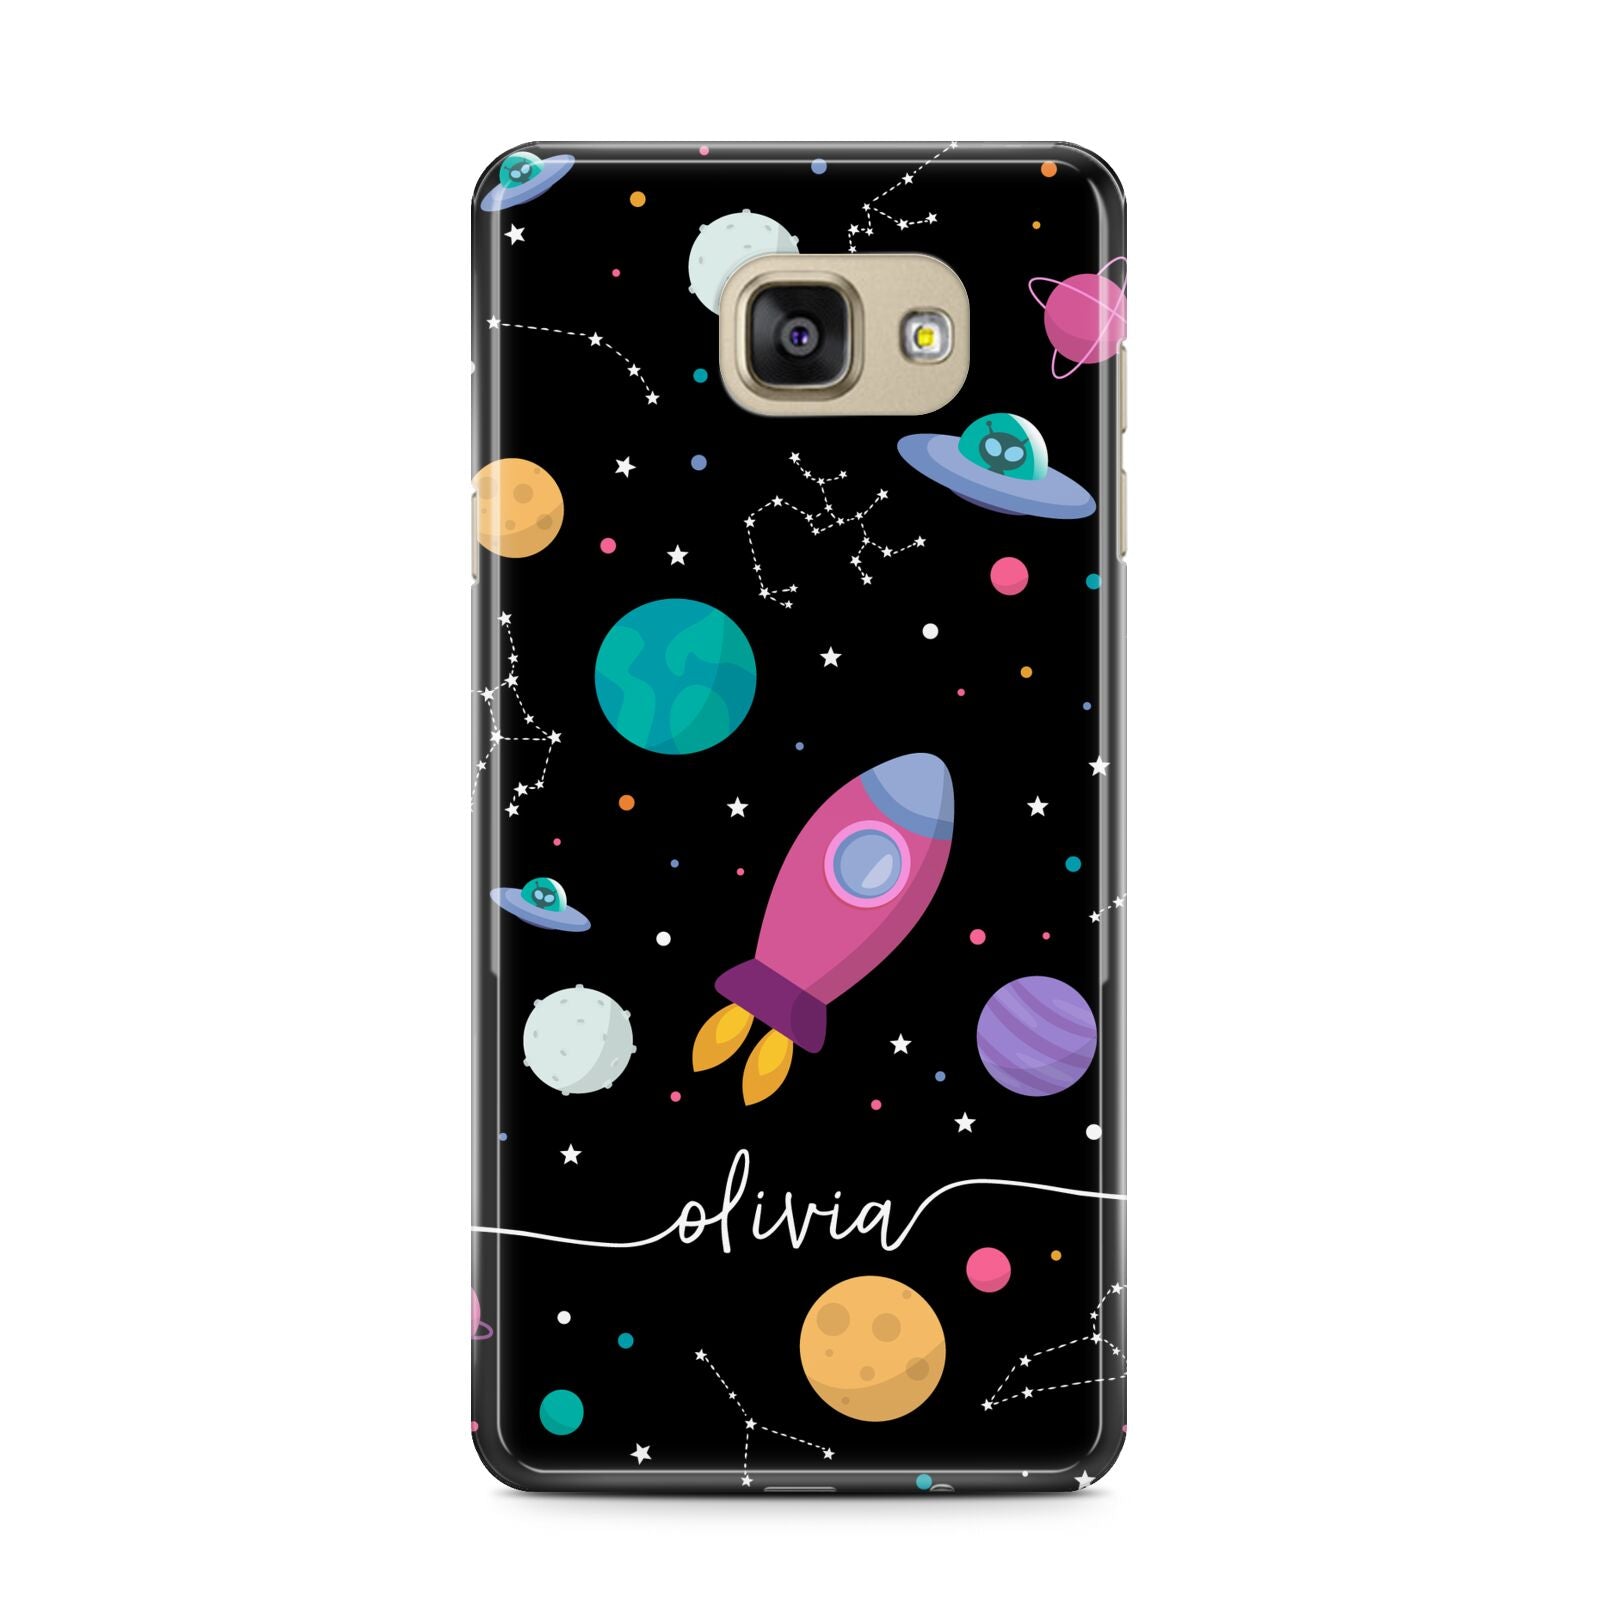 Galaxy Artwork with Name Samsung Galaxy A7 2016 Case on gold phone